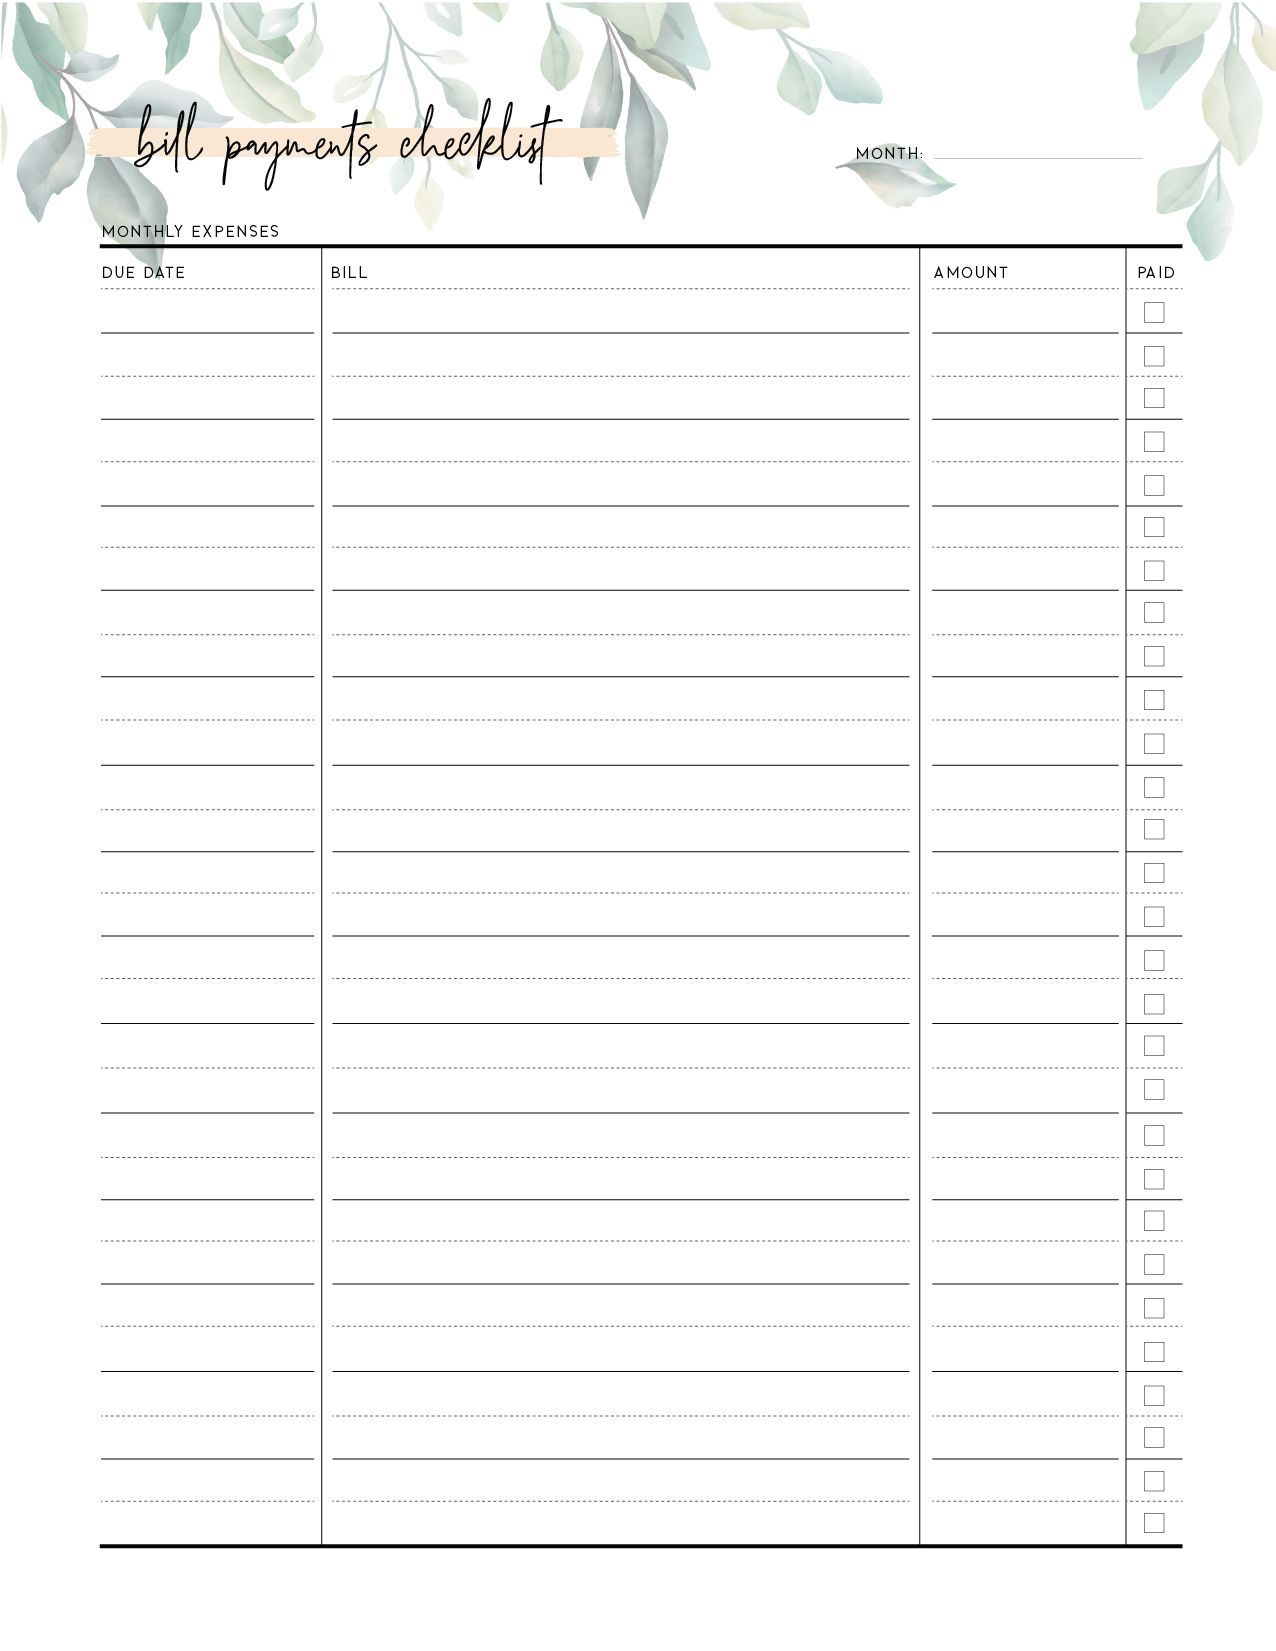 Free Bill Payment Checklist Pdf within Free Printable Monthly Bill Checklist